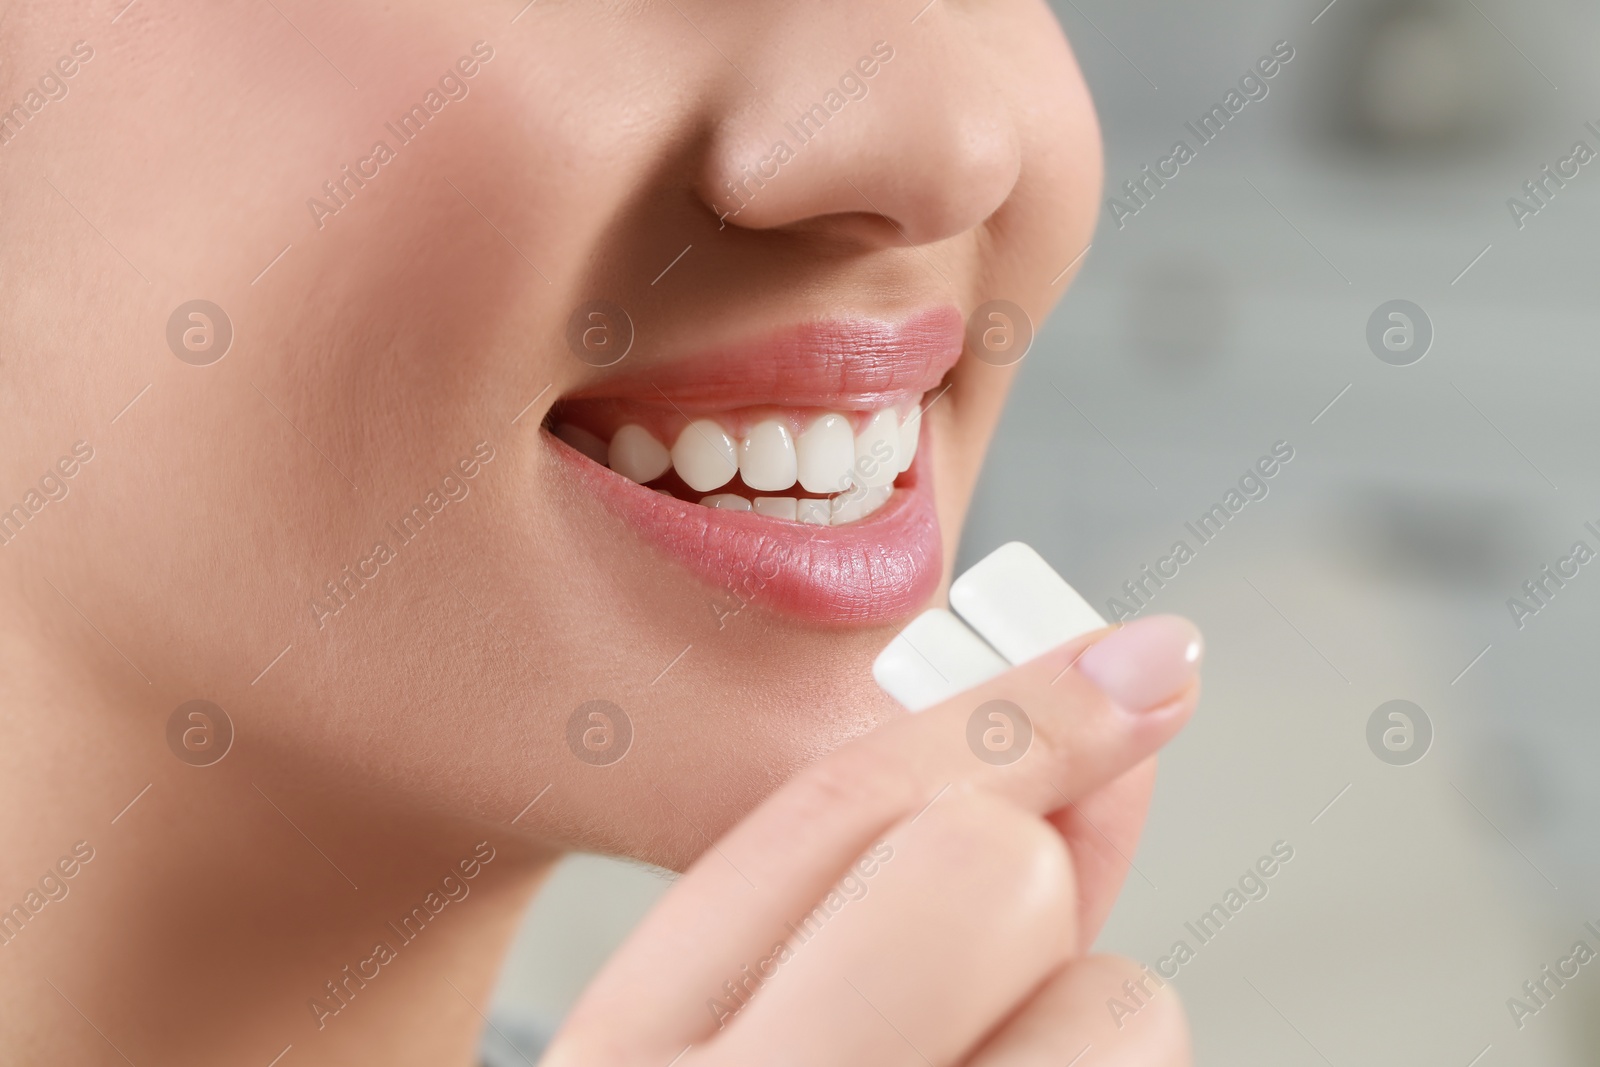 Photo of Woman putting chewing gum pieces into mouth on blurred background, closeup